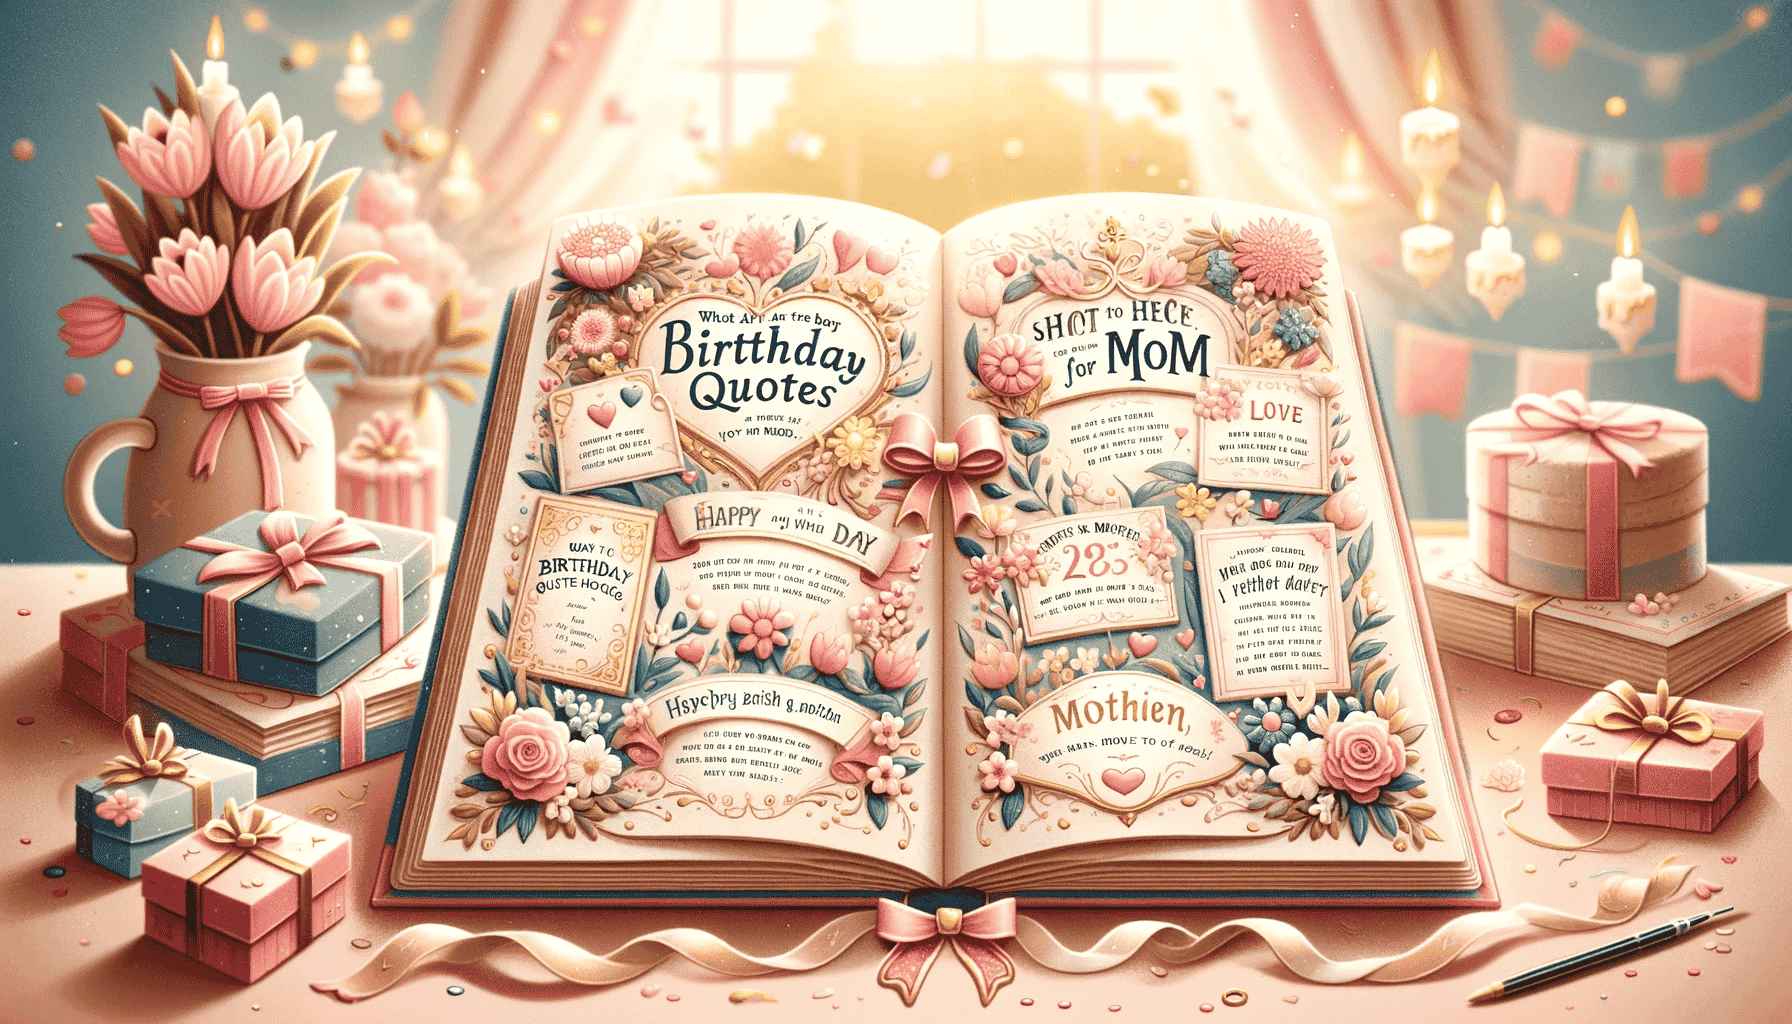 What Are the Best Birthday Quotes for Mom